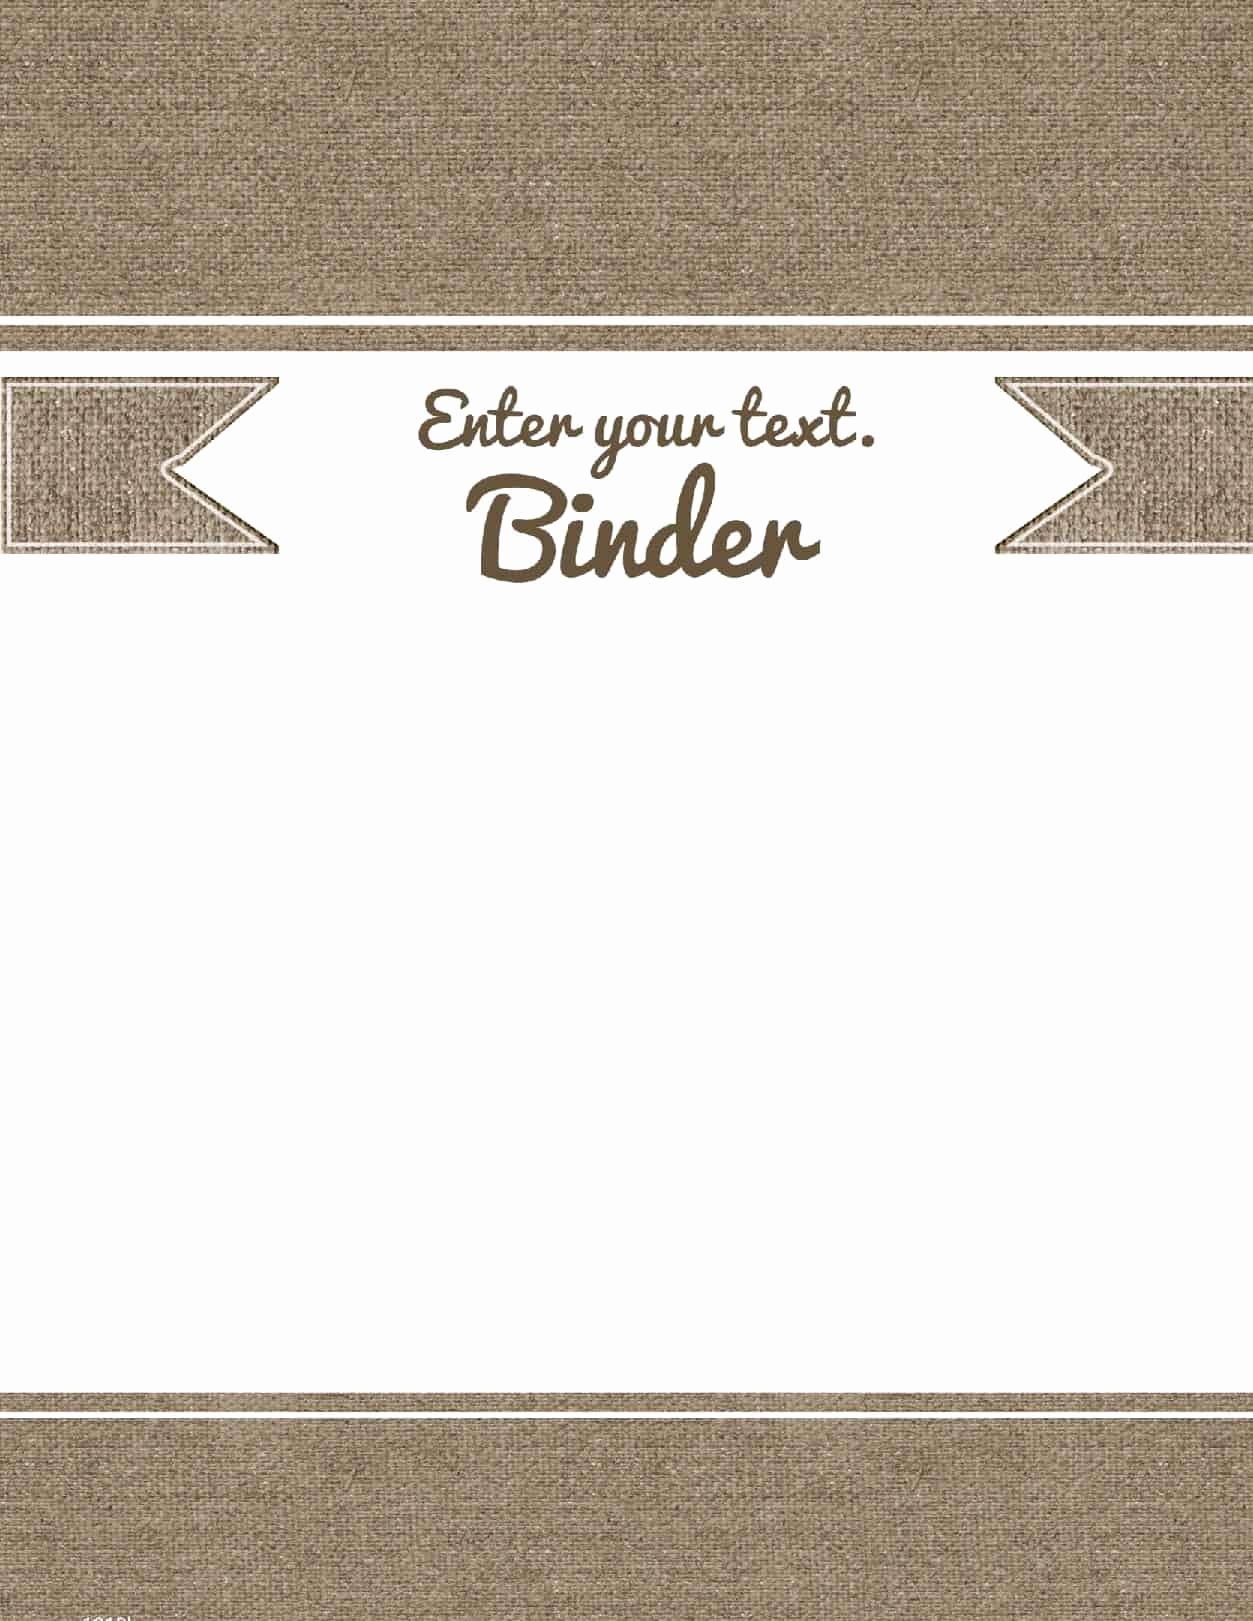 Free Binder Cover Templates